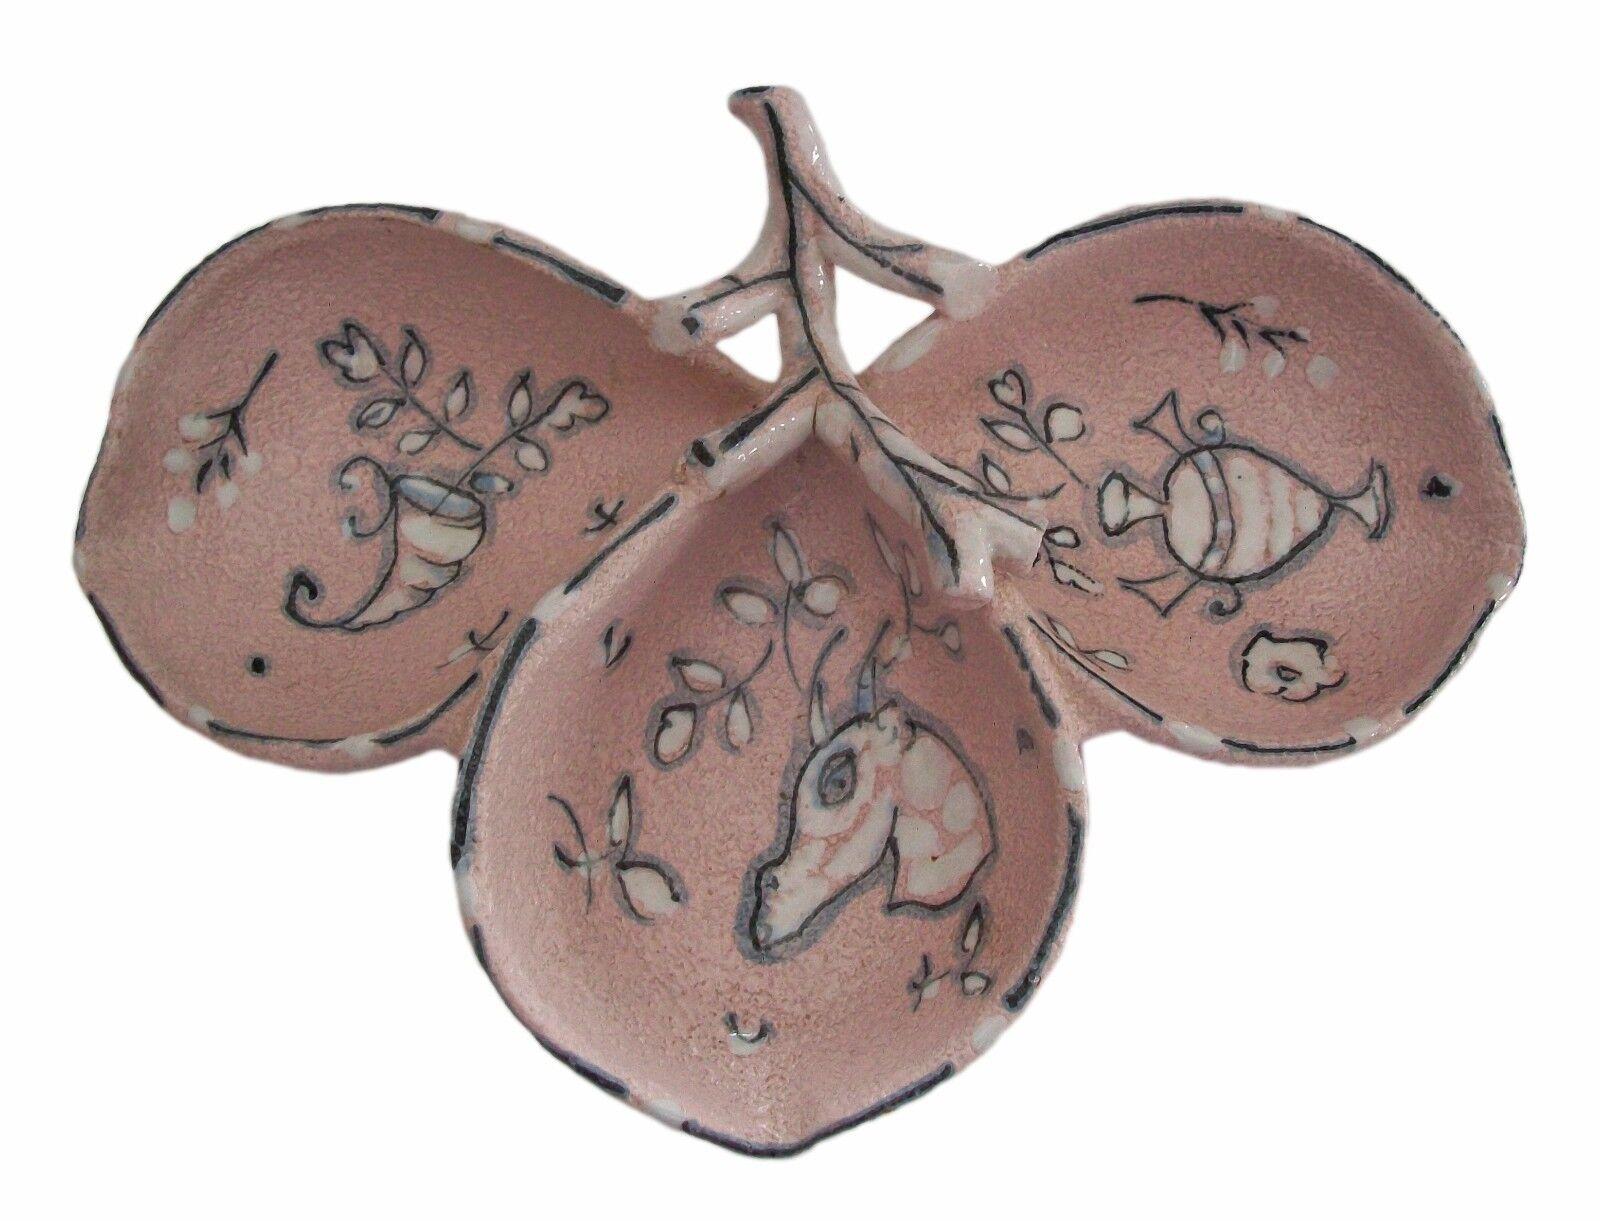 FRATELLI FANCIULLACCI - Exceptional hand painted lemon form ceramic dish - featuring a stylized deer and cornucopia and vase with flowers and butterfly - a branch connects each compartment (lemon form) - textured pink glaze - signed - 'Italy' and